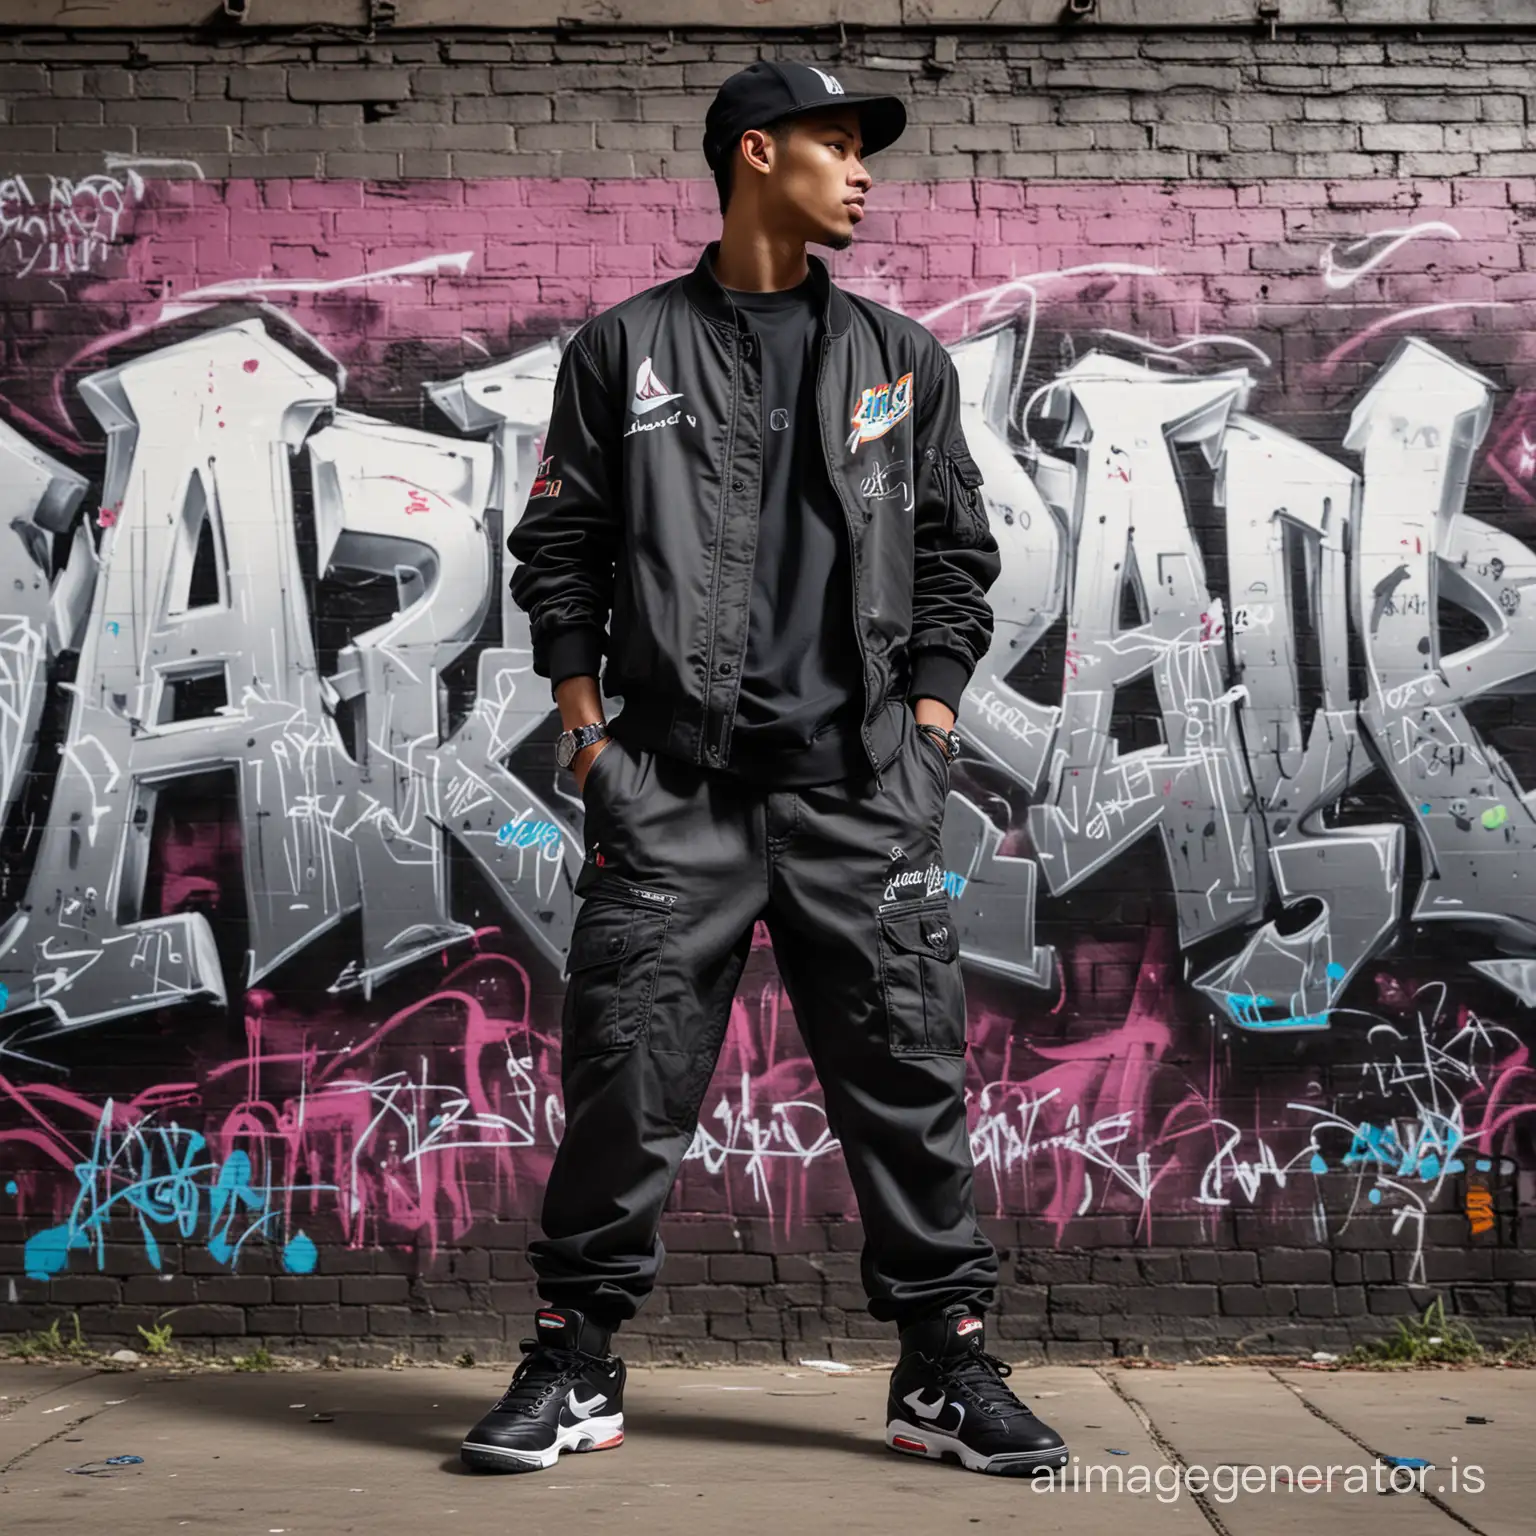 Glossy 4k airbrush oil ink painting of an Indonesian guy wearing a backward ball cap in hip-hop style, cargo trousers, Nike Jordan 6 shoes, standing in the middle with his hands folded against a background filled with neon graffiti. The graffiti contains eye-catching words such as "PROMPT AI" and "OWEN" in a spray-painted font. confident and cool attitude. perfectly capturing the essence of urban graffiti art.